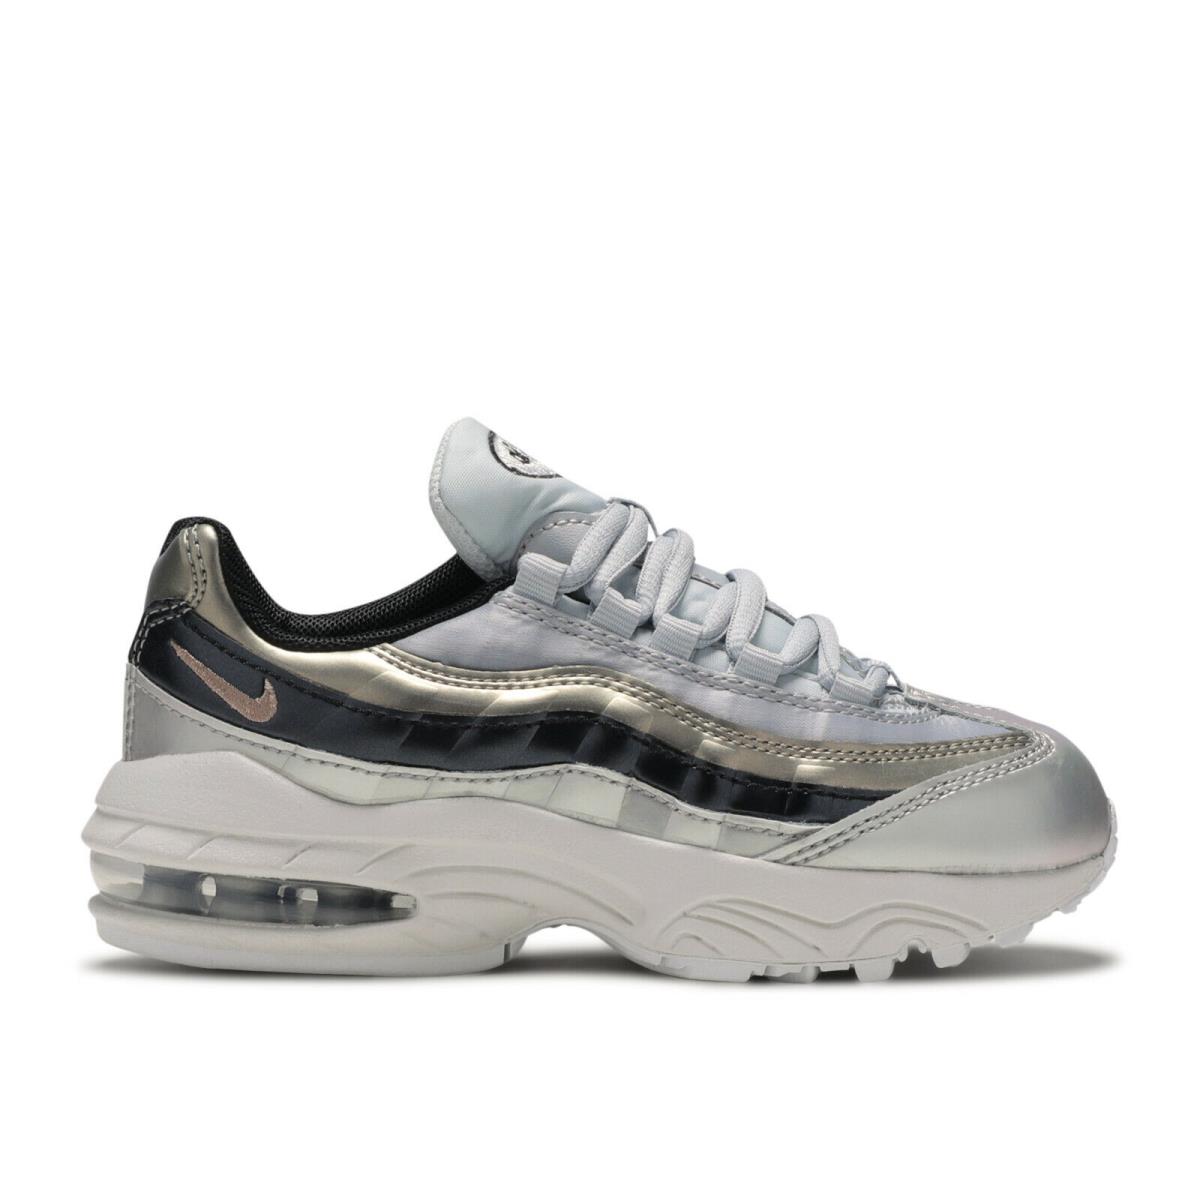 Nike Air Max 95 Special Edition Youth Size 11.0 C Metallic Platinum Rare - METALLIC PLATINUM, METALLIC RED BRONZE